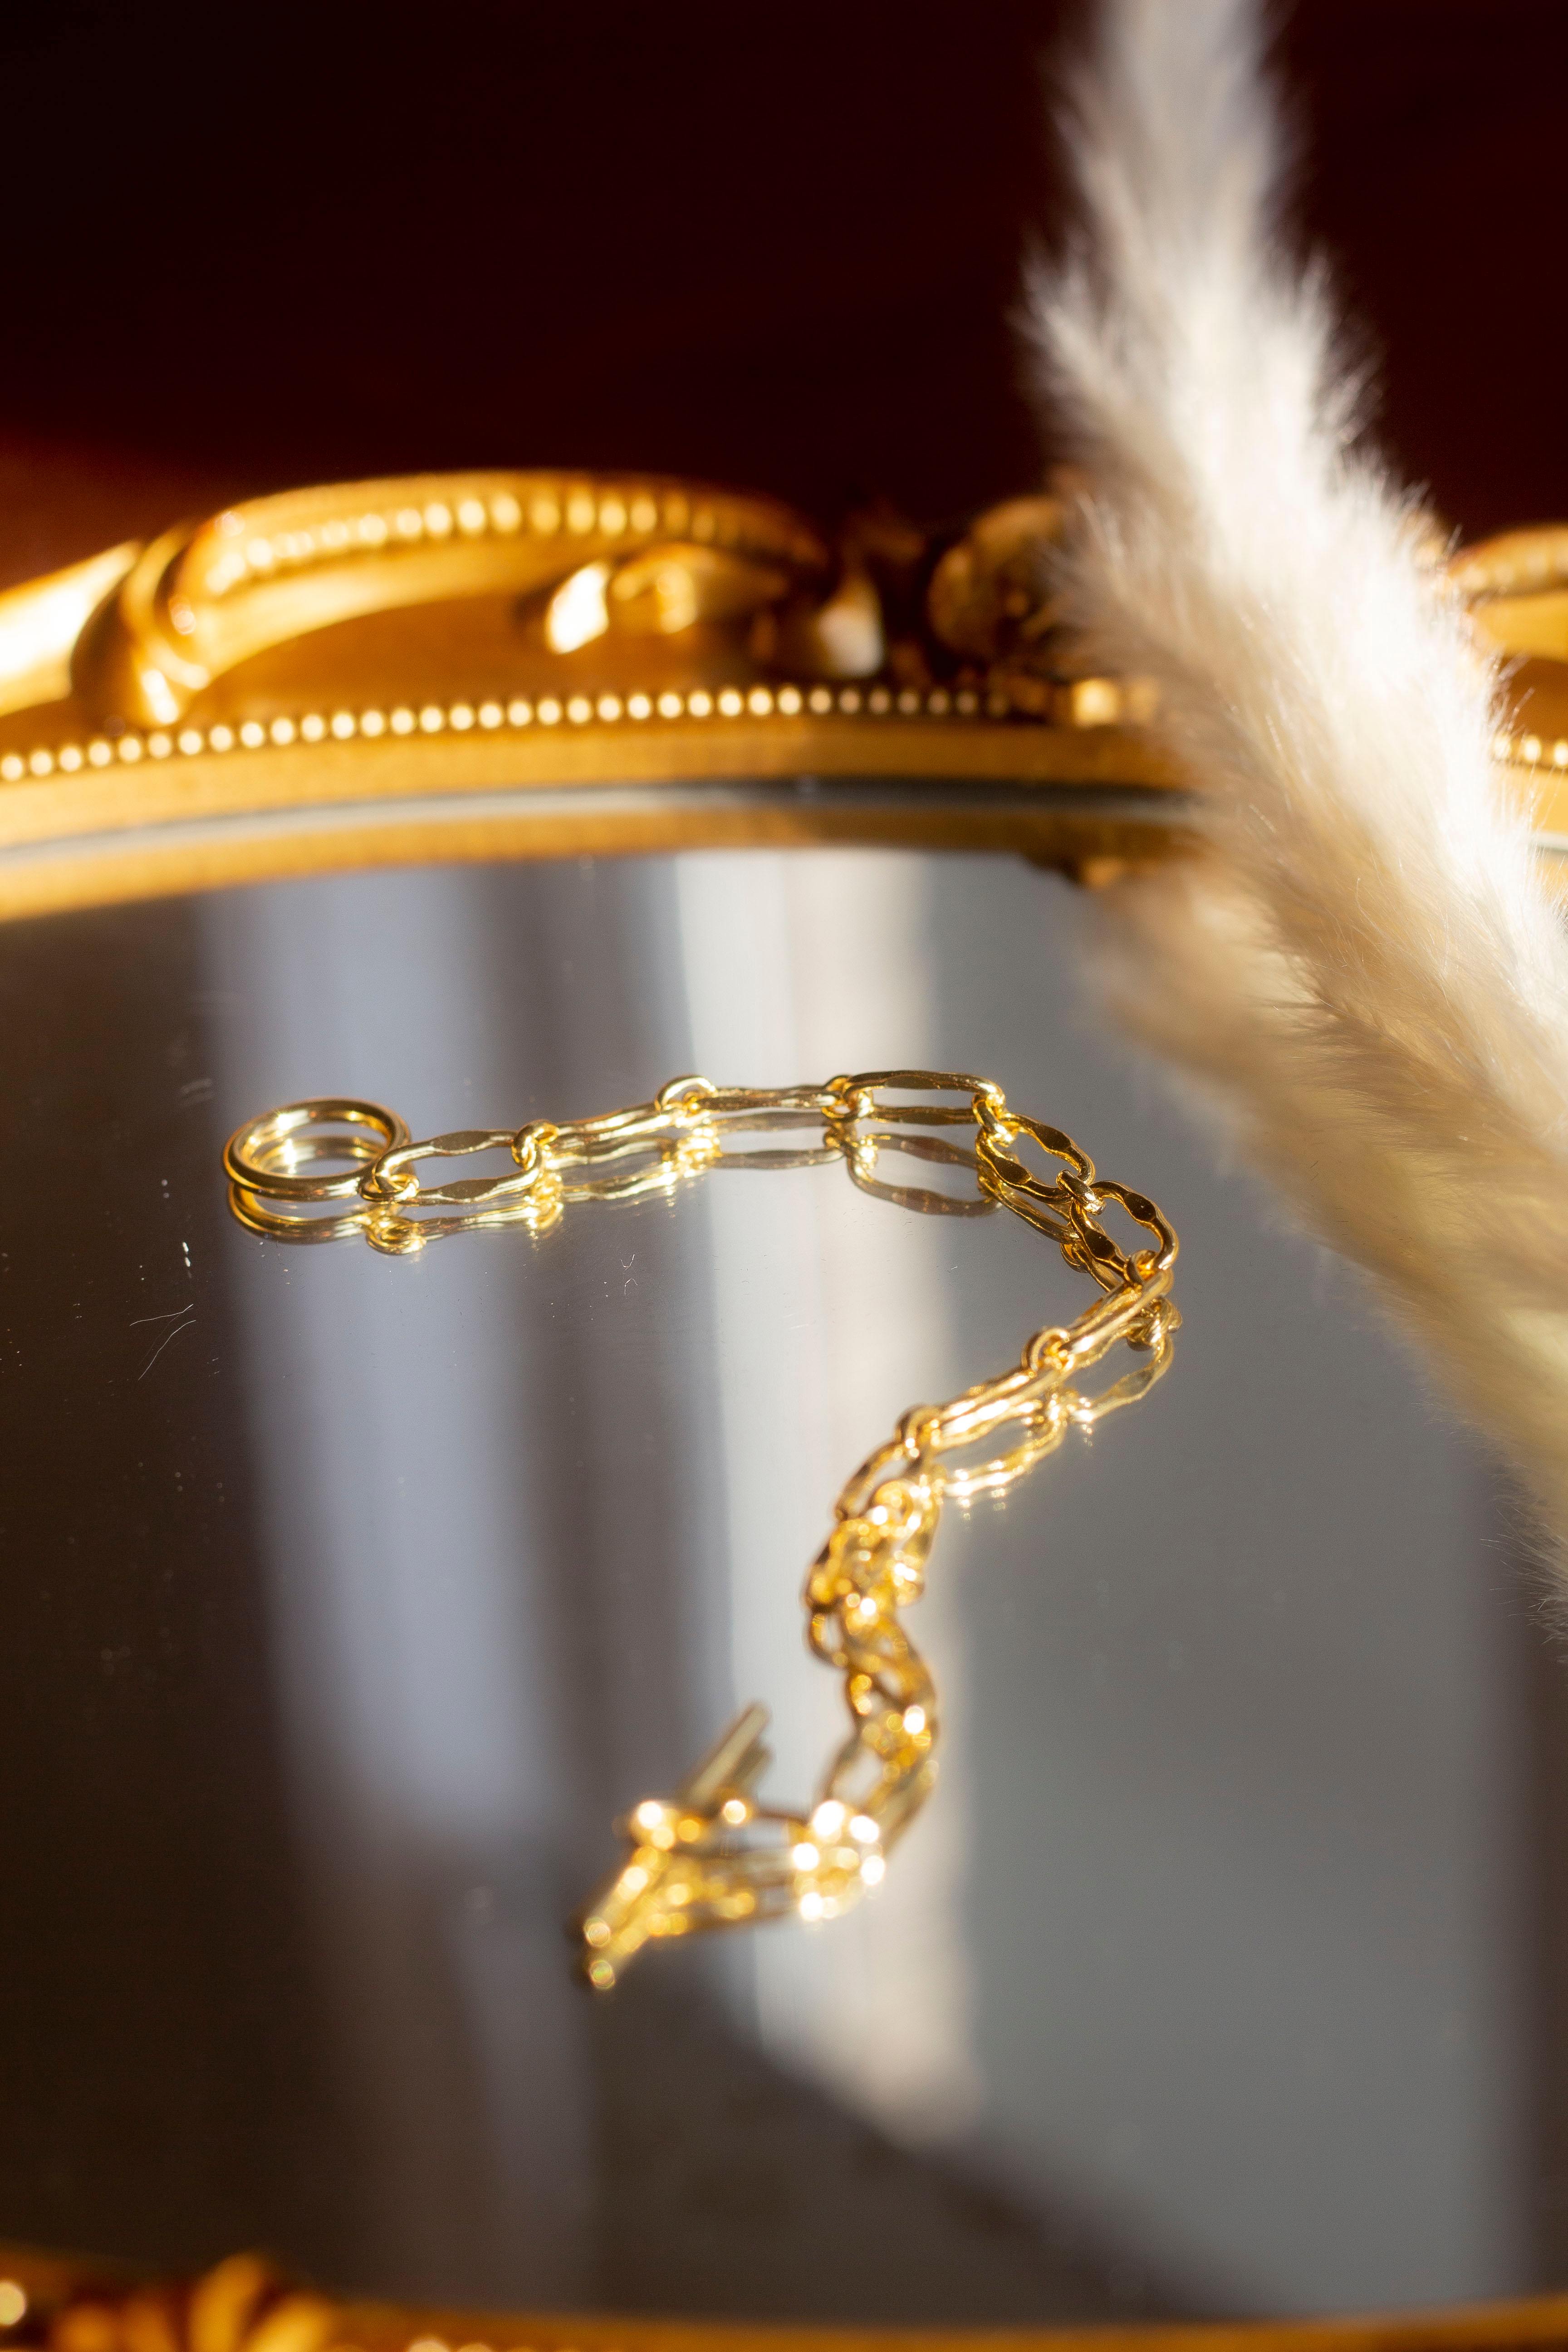 18k gold chain bracelet resting on a mirror with gold edges. The bracelet has a round hollow charm. Hollow Signature Chain Bracelet by E's Element by Emmanuela Okon.